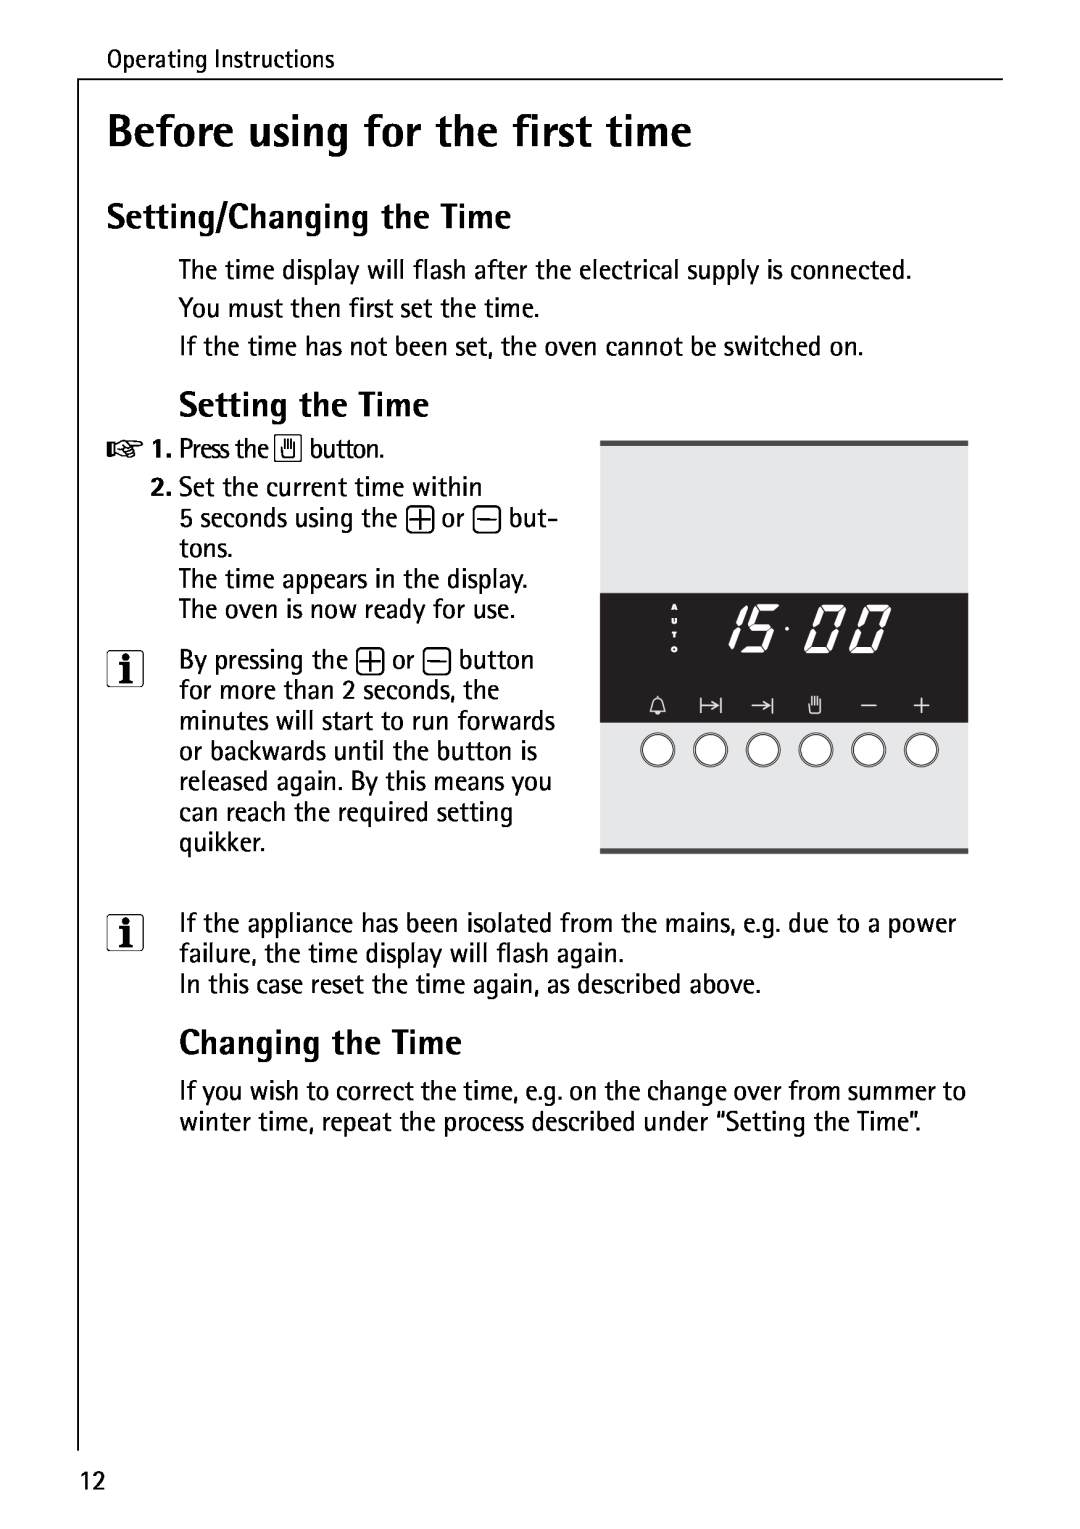 AEG B 2100 operating instructions Before using for the first time, Setting/Changing the Time, Setting the Time 